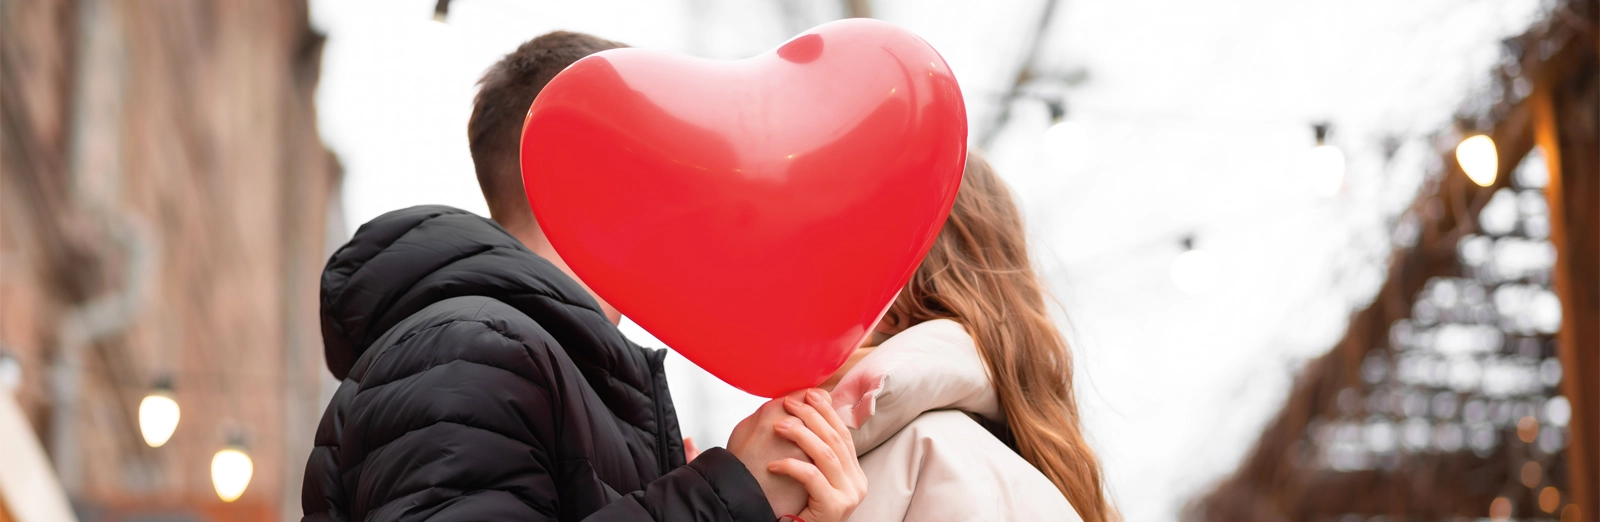 couple-with-heart-shaped-balloon-1600x522.webp